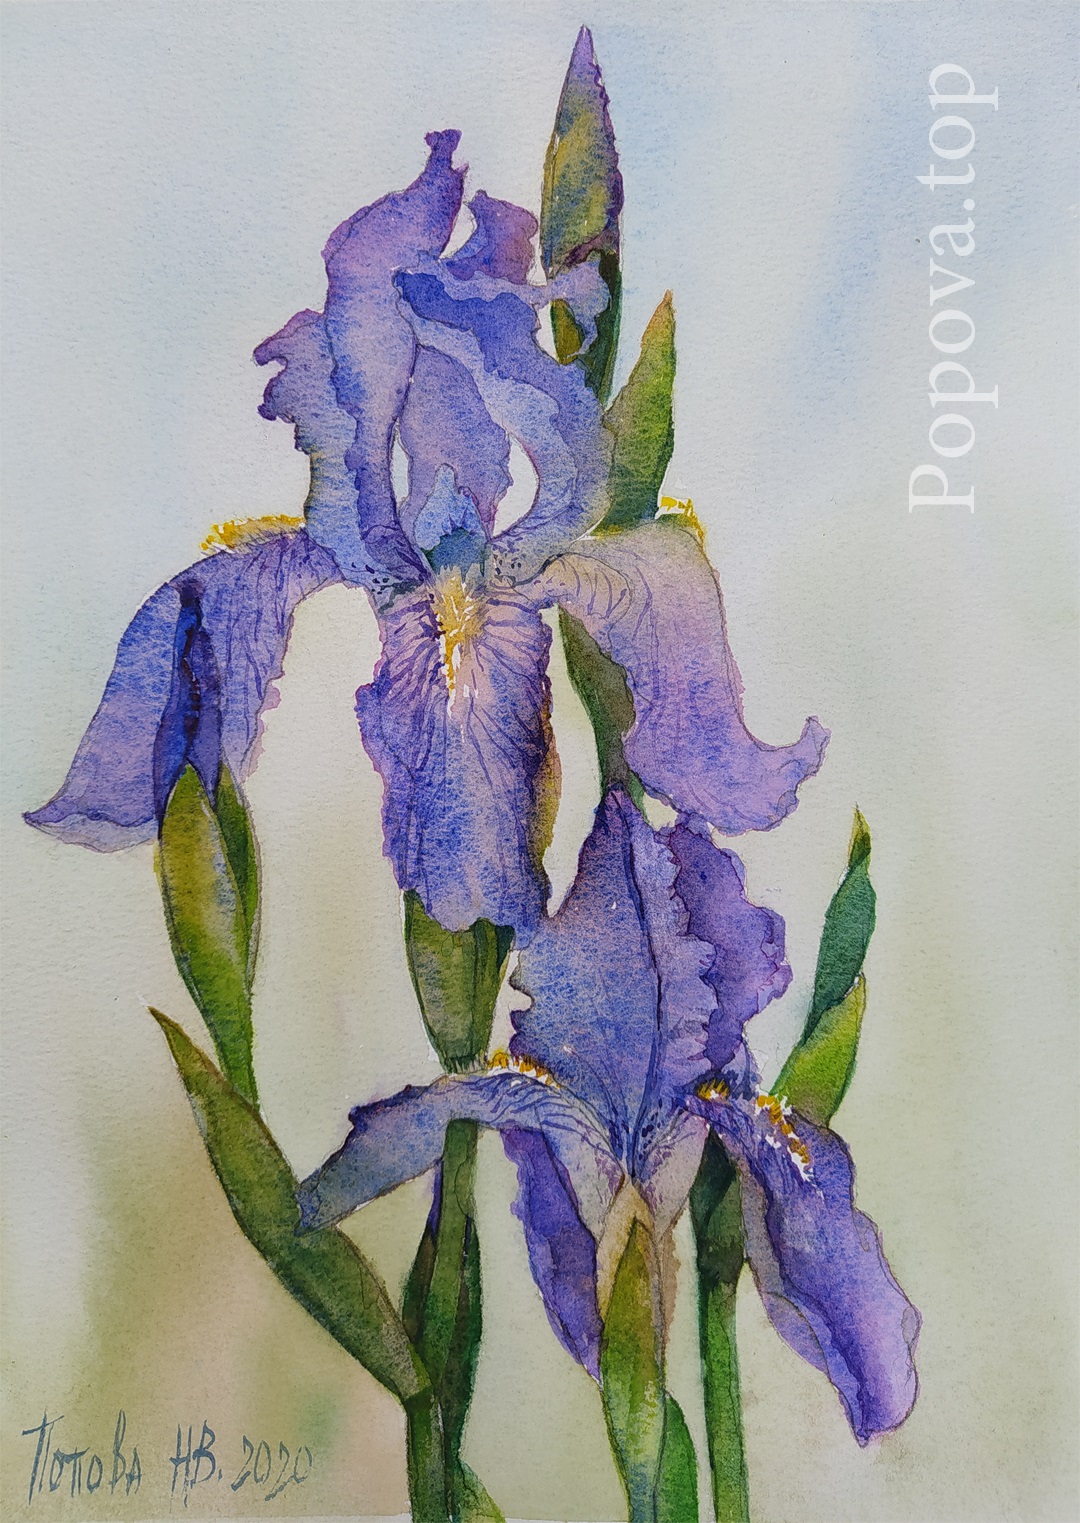 Irises 4 option 3 Painting Watercolor A4 Painted by Natalia Popova - Professional Artist 2020